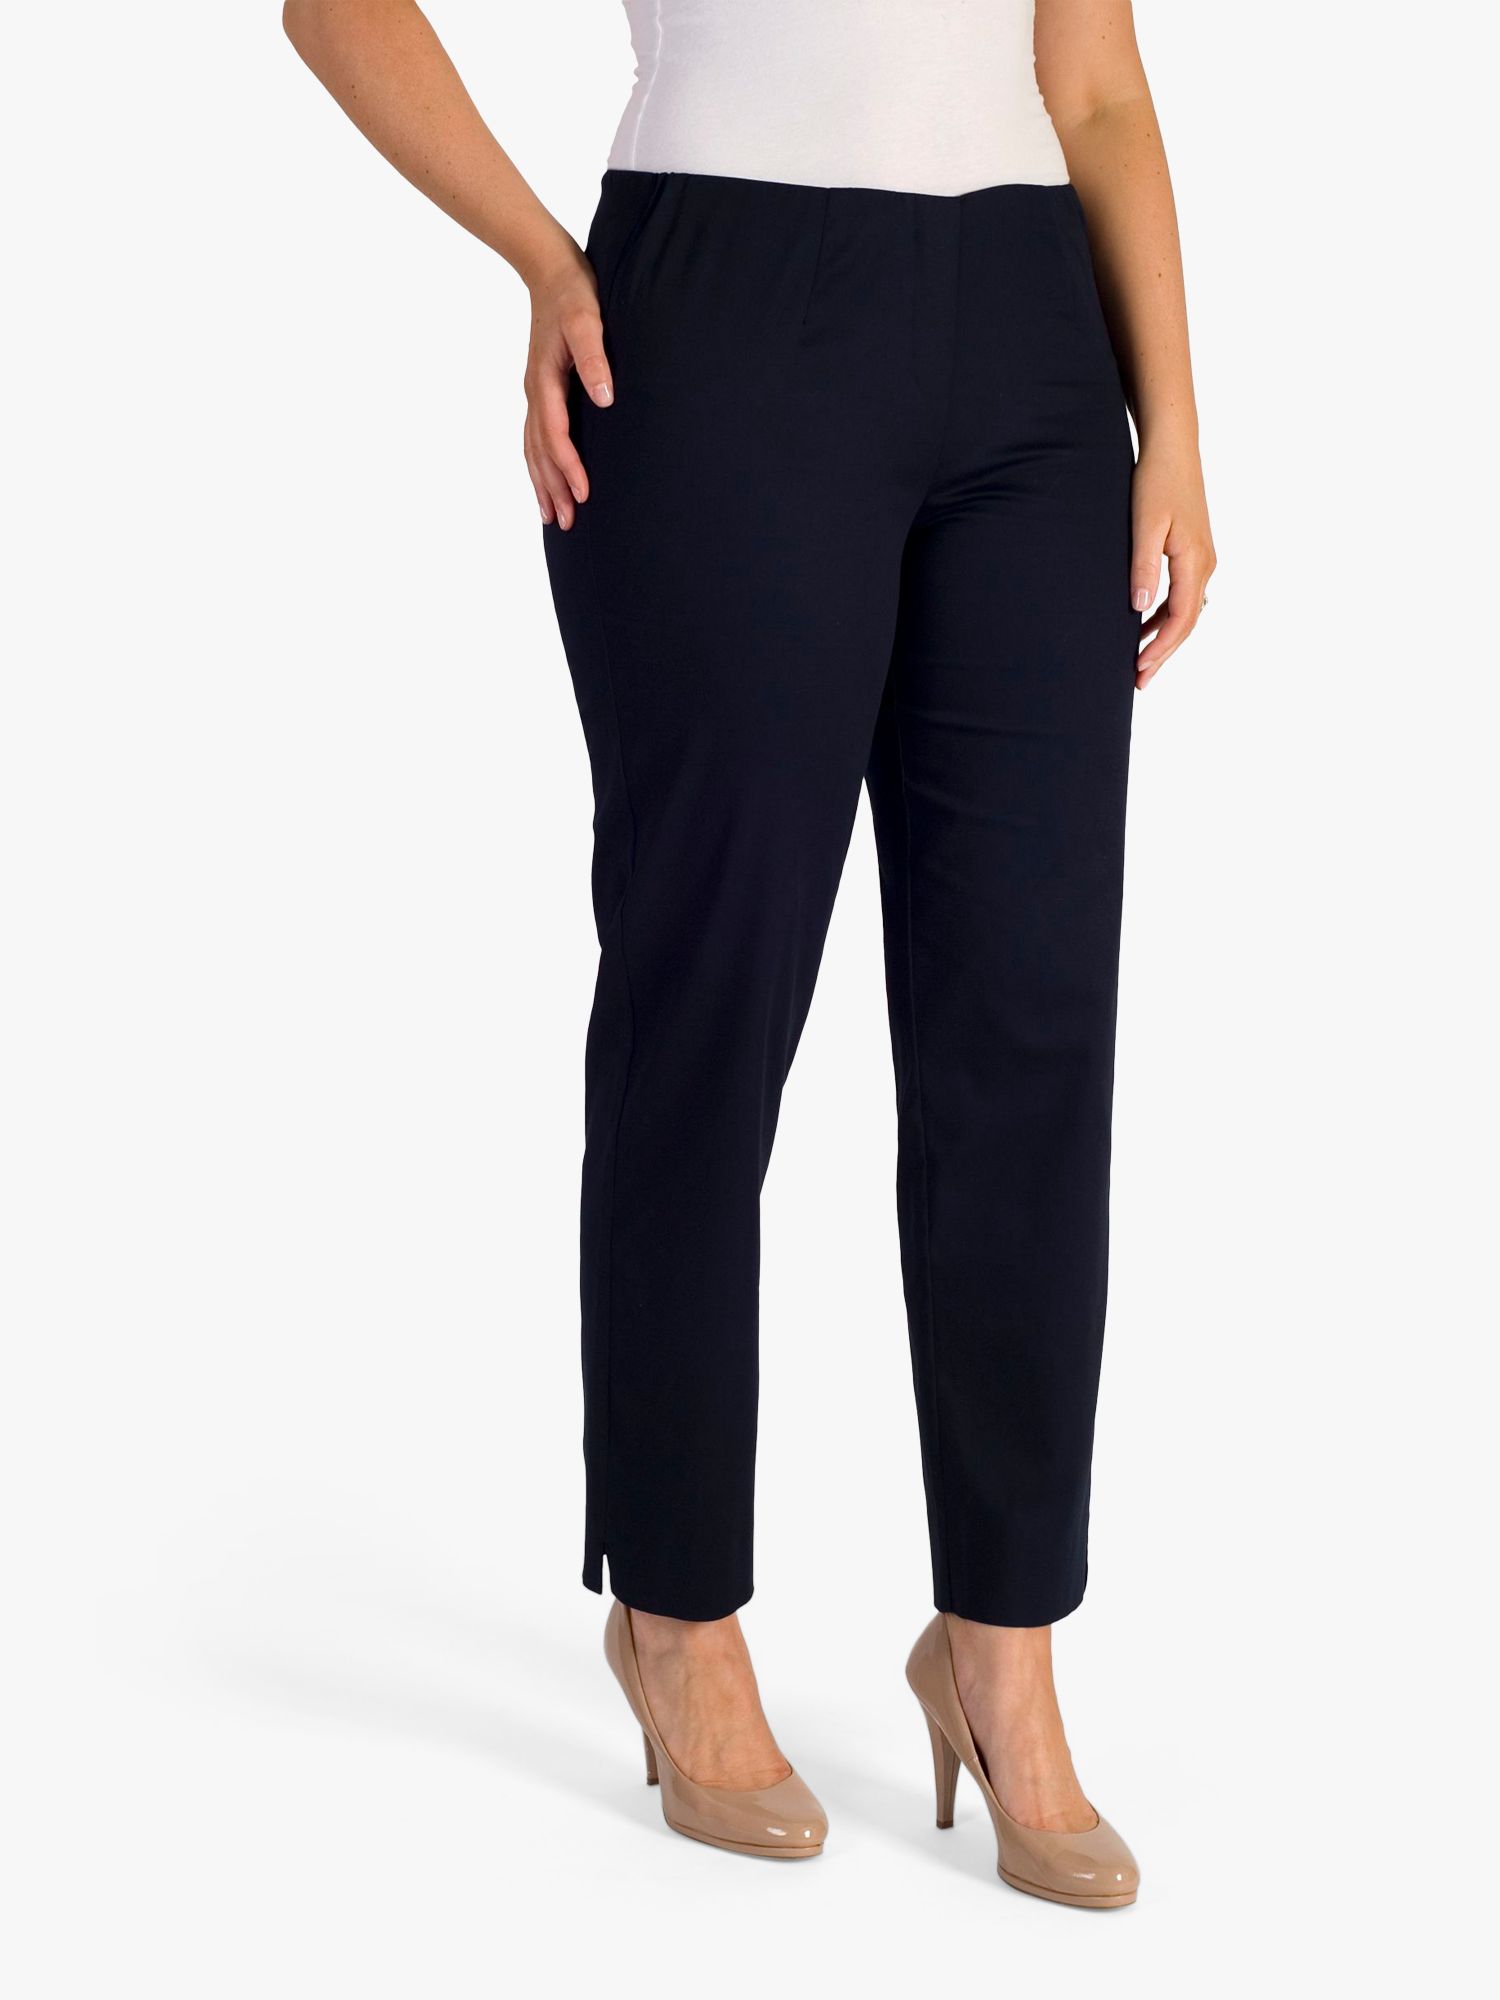 chesca Stretch Cotton Trousers, Navy at John Lewis & Partners